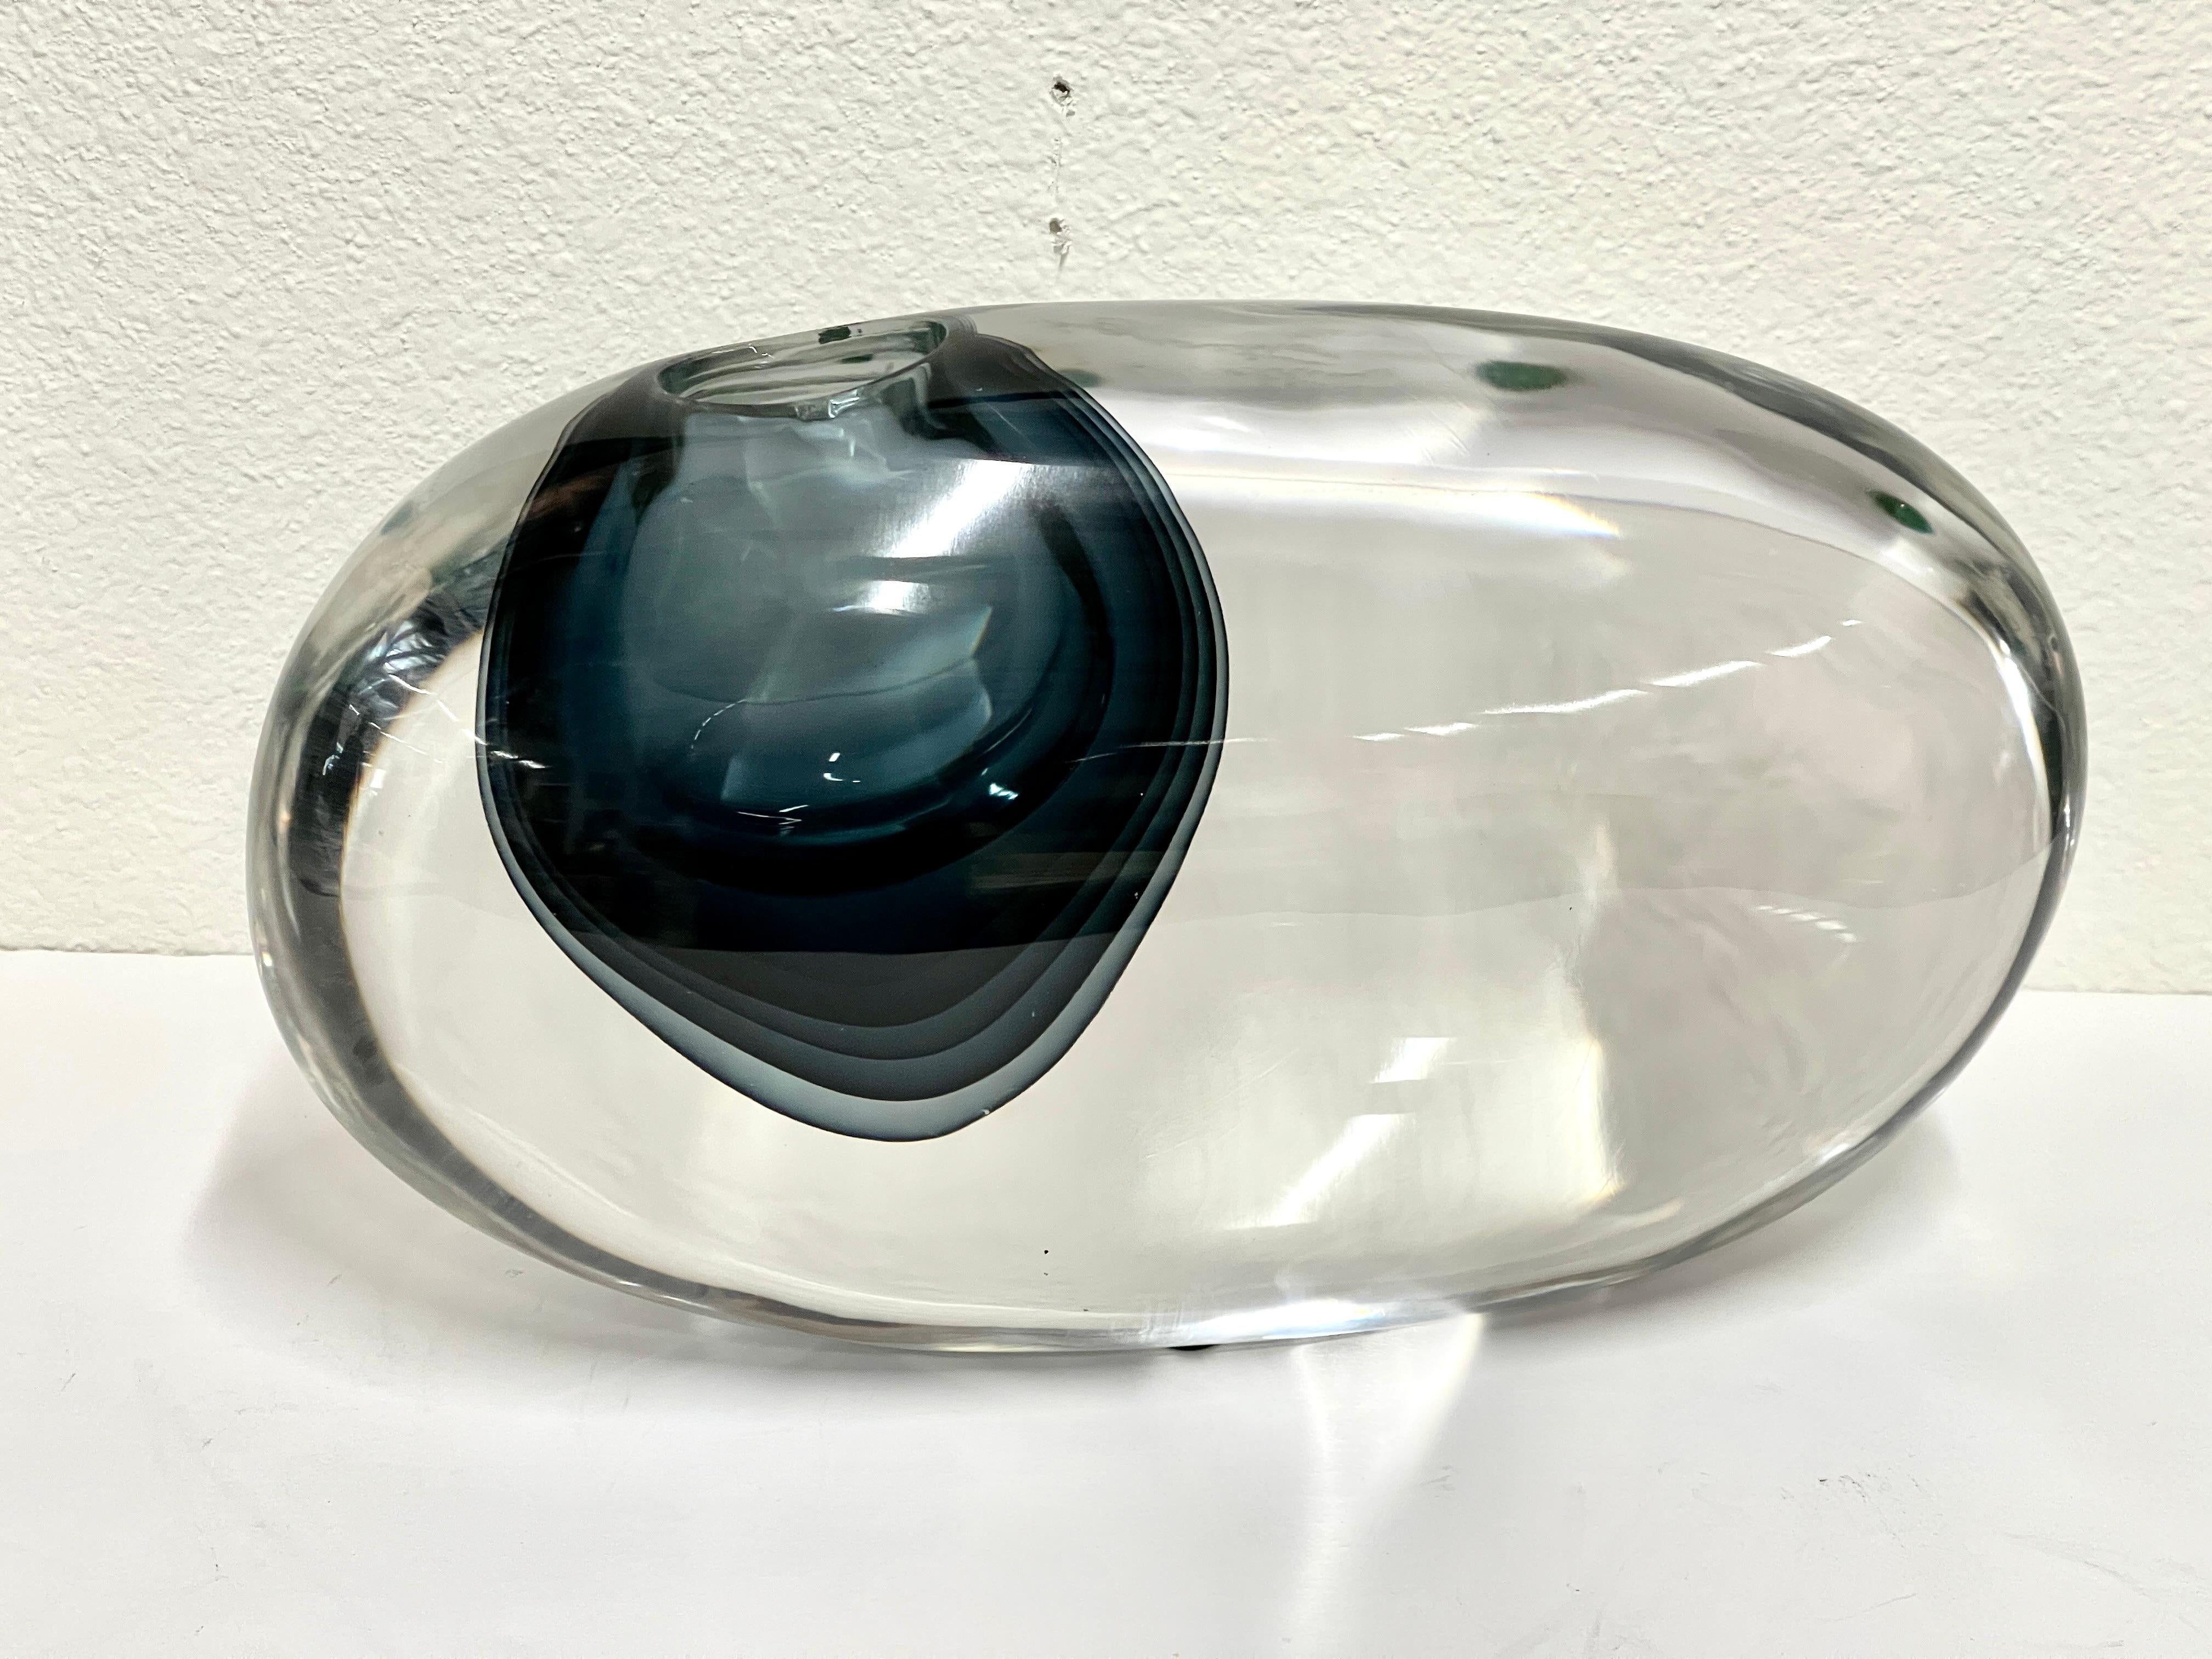 Wonderful sommerso abstract glass sculpture by the Italian master Pino Signoretto. It is signed on the base with some additional words we cannot make out. It is numbered 7/250. We don't believe this is an edition, but inventory numbers. In good